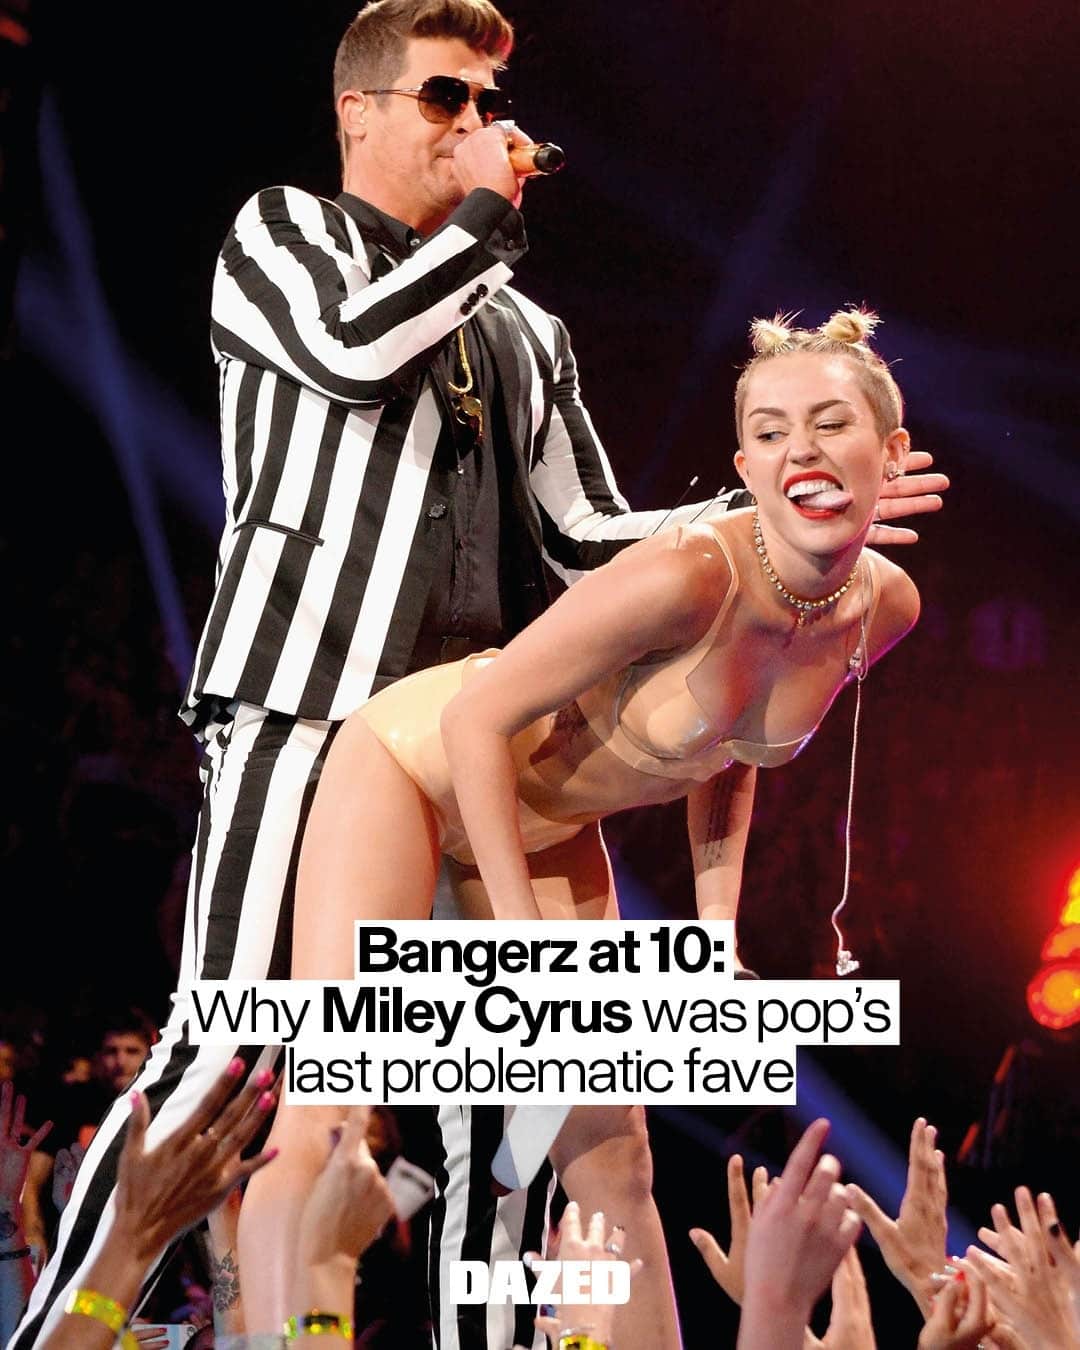 Dazed Magazineのインスタグラム：「If the last decade of pop music has shown us anything, it’s that @mileycyrus' Bangerz just may have been the last, truly problematic era of pop superstardom 😜⁠ ⁠ Upon its release ten years ago, Bangerz generated a slew of headlines, drawing controversy mainly for cultural appropriation, as well as some choice collaborations with Robin Thicke and Terry Richardson. ⁠ ⁠ But what makes the Bangerz era particularly memorable, is that the cultural conditions needed for the same thing to happen, in exactly the same way today, have changed forever.⁠ ⁠ Read the full deep-dive through the link in our bio 🔗⁠ ⁠ 📷 via Jeff Kravitz/FilmMagic for MTV⁠ ✍️ @elliothoste」